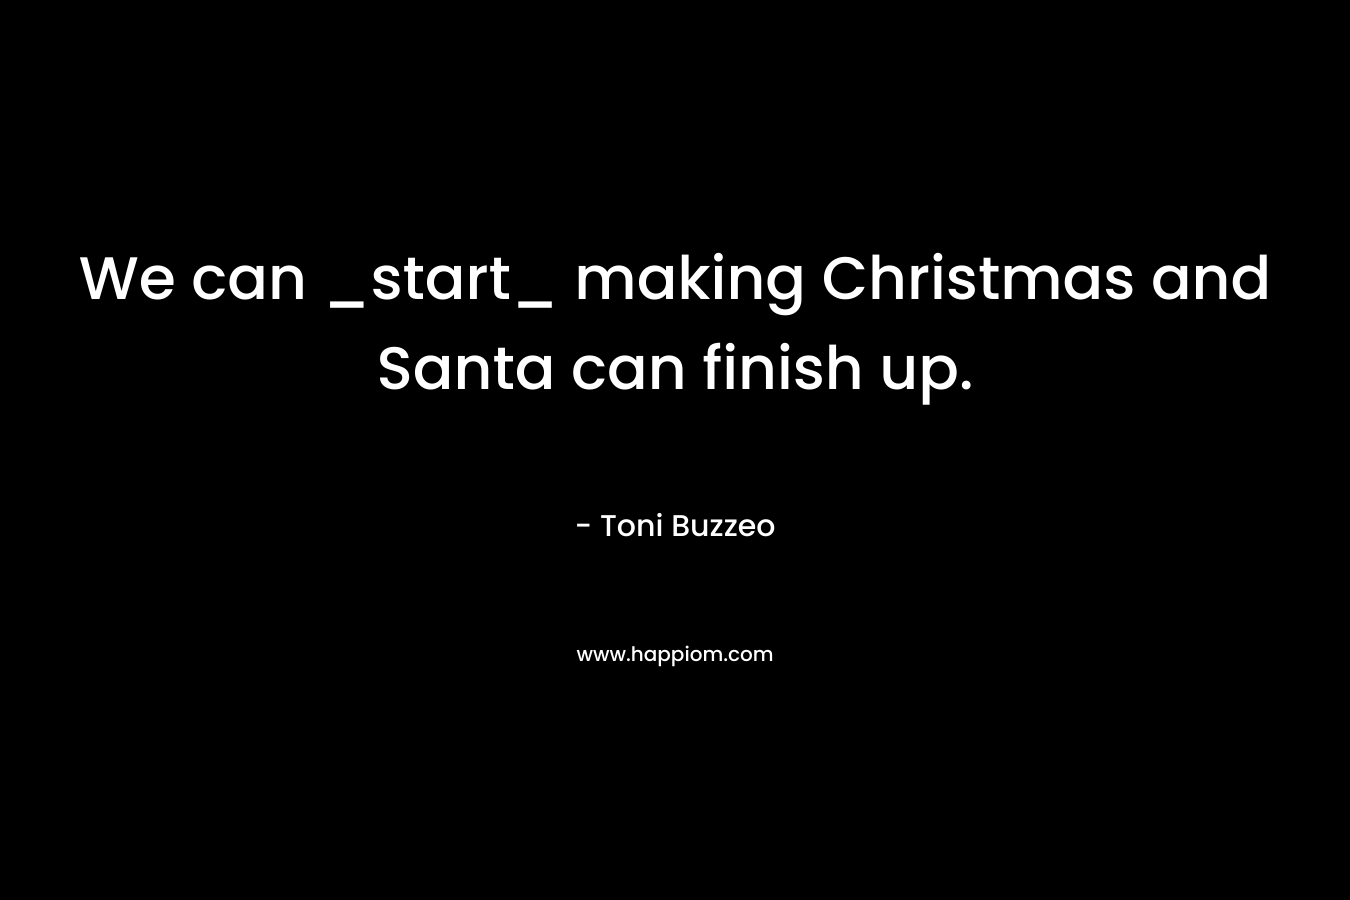 We can _start_ making Christmas and Santa can finish up. – Toni Buzzeo